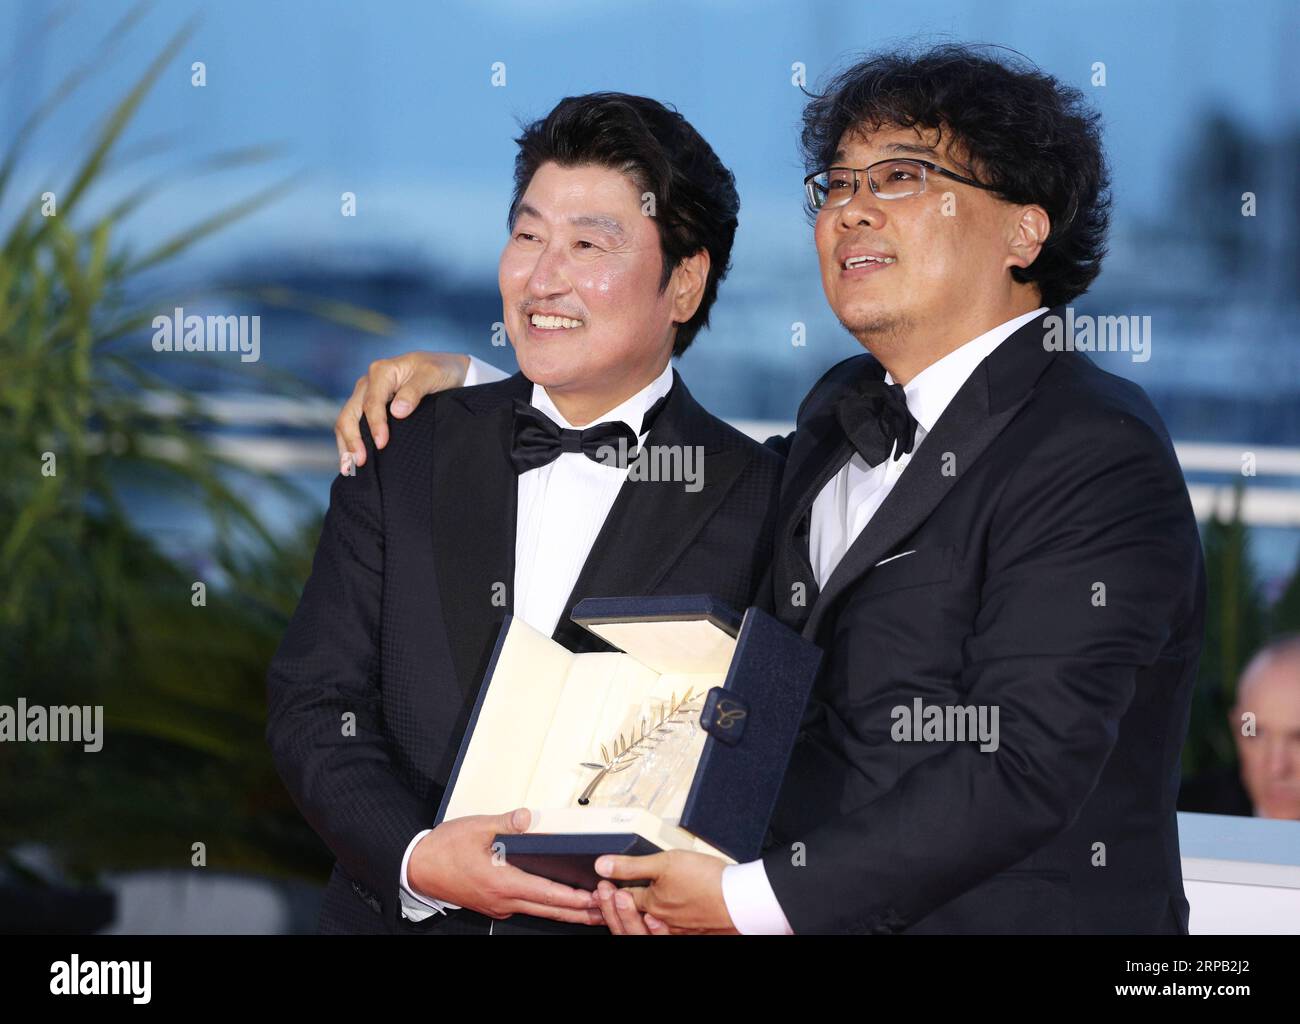 (190526) -- CANNES, May 26, 2019 (Xinhua) -- South Korean director Bong Joon-Ho (R), winner of the Palme d Or award for the film Parasite poses with actor Song Kang-ho during a photocall at the 72nd Cannes Film Festival in Cannes, France, on May 25, 2019. The curtain of the 72nd edition of the Cannes Film Festival fell on Saturday evening, with South Korean movie Parasite winning this year s most prestigious award, the Palme d Or. (Xinhua/Gao Jing) FRANCE-CANNES-FILM FESTIVAL-PALME D OR PUBLICATIONxNOTxINxCHN Stock Photo